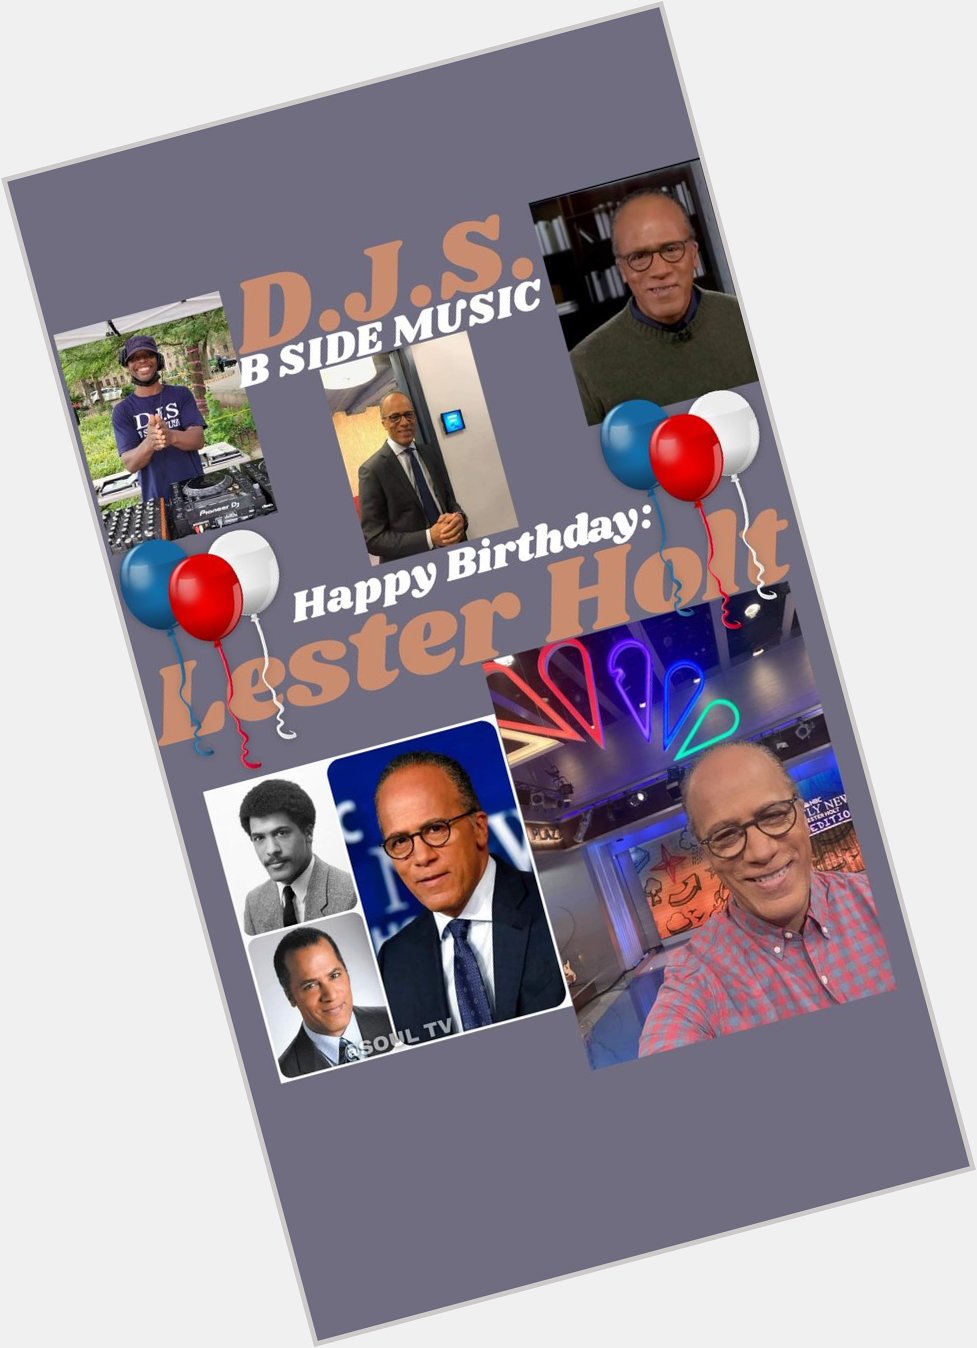 I(D.J.S.)\"B SIDE MUSIC\" saying Happy Birthday to Journalist/News Anchor: \"LESTER HOLT\"!!! 